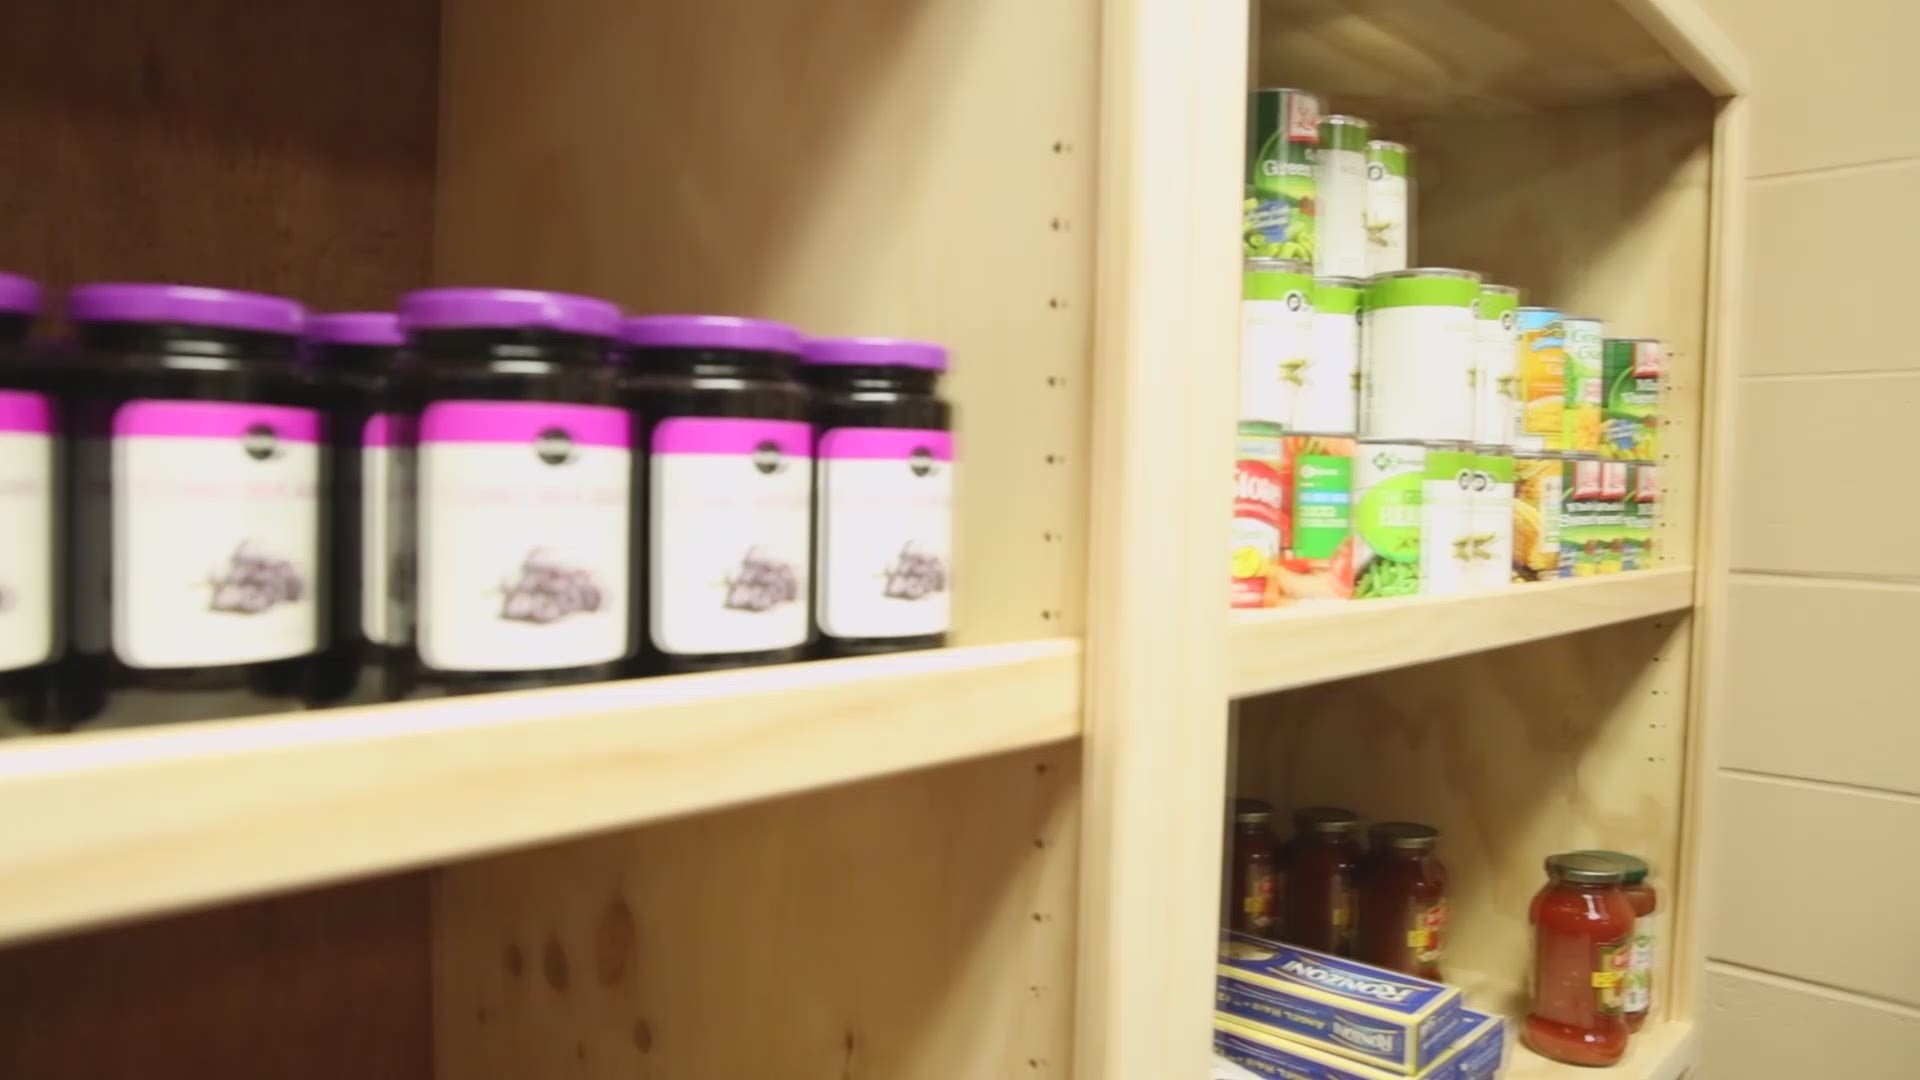 Some campuses are using food pantries to help students who may have limited access to meals.